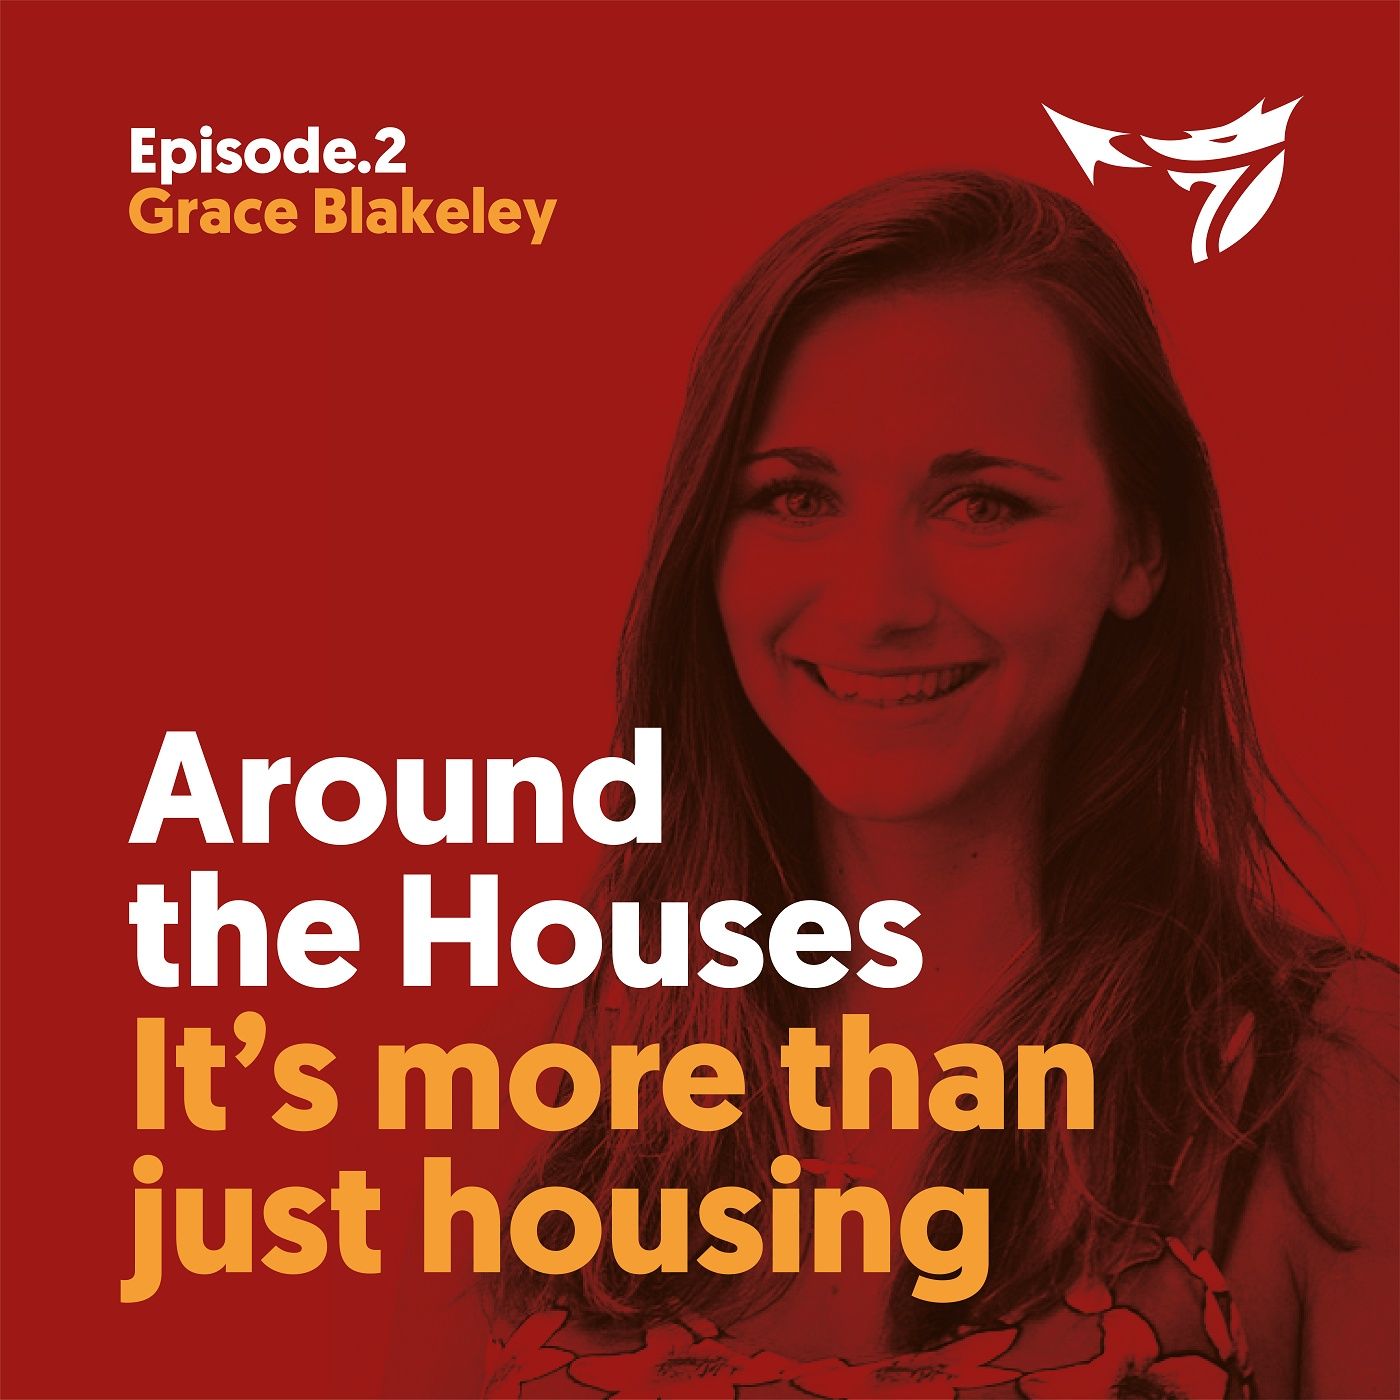 Grace Blakeley on Brexit and the economy